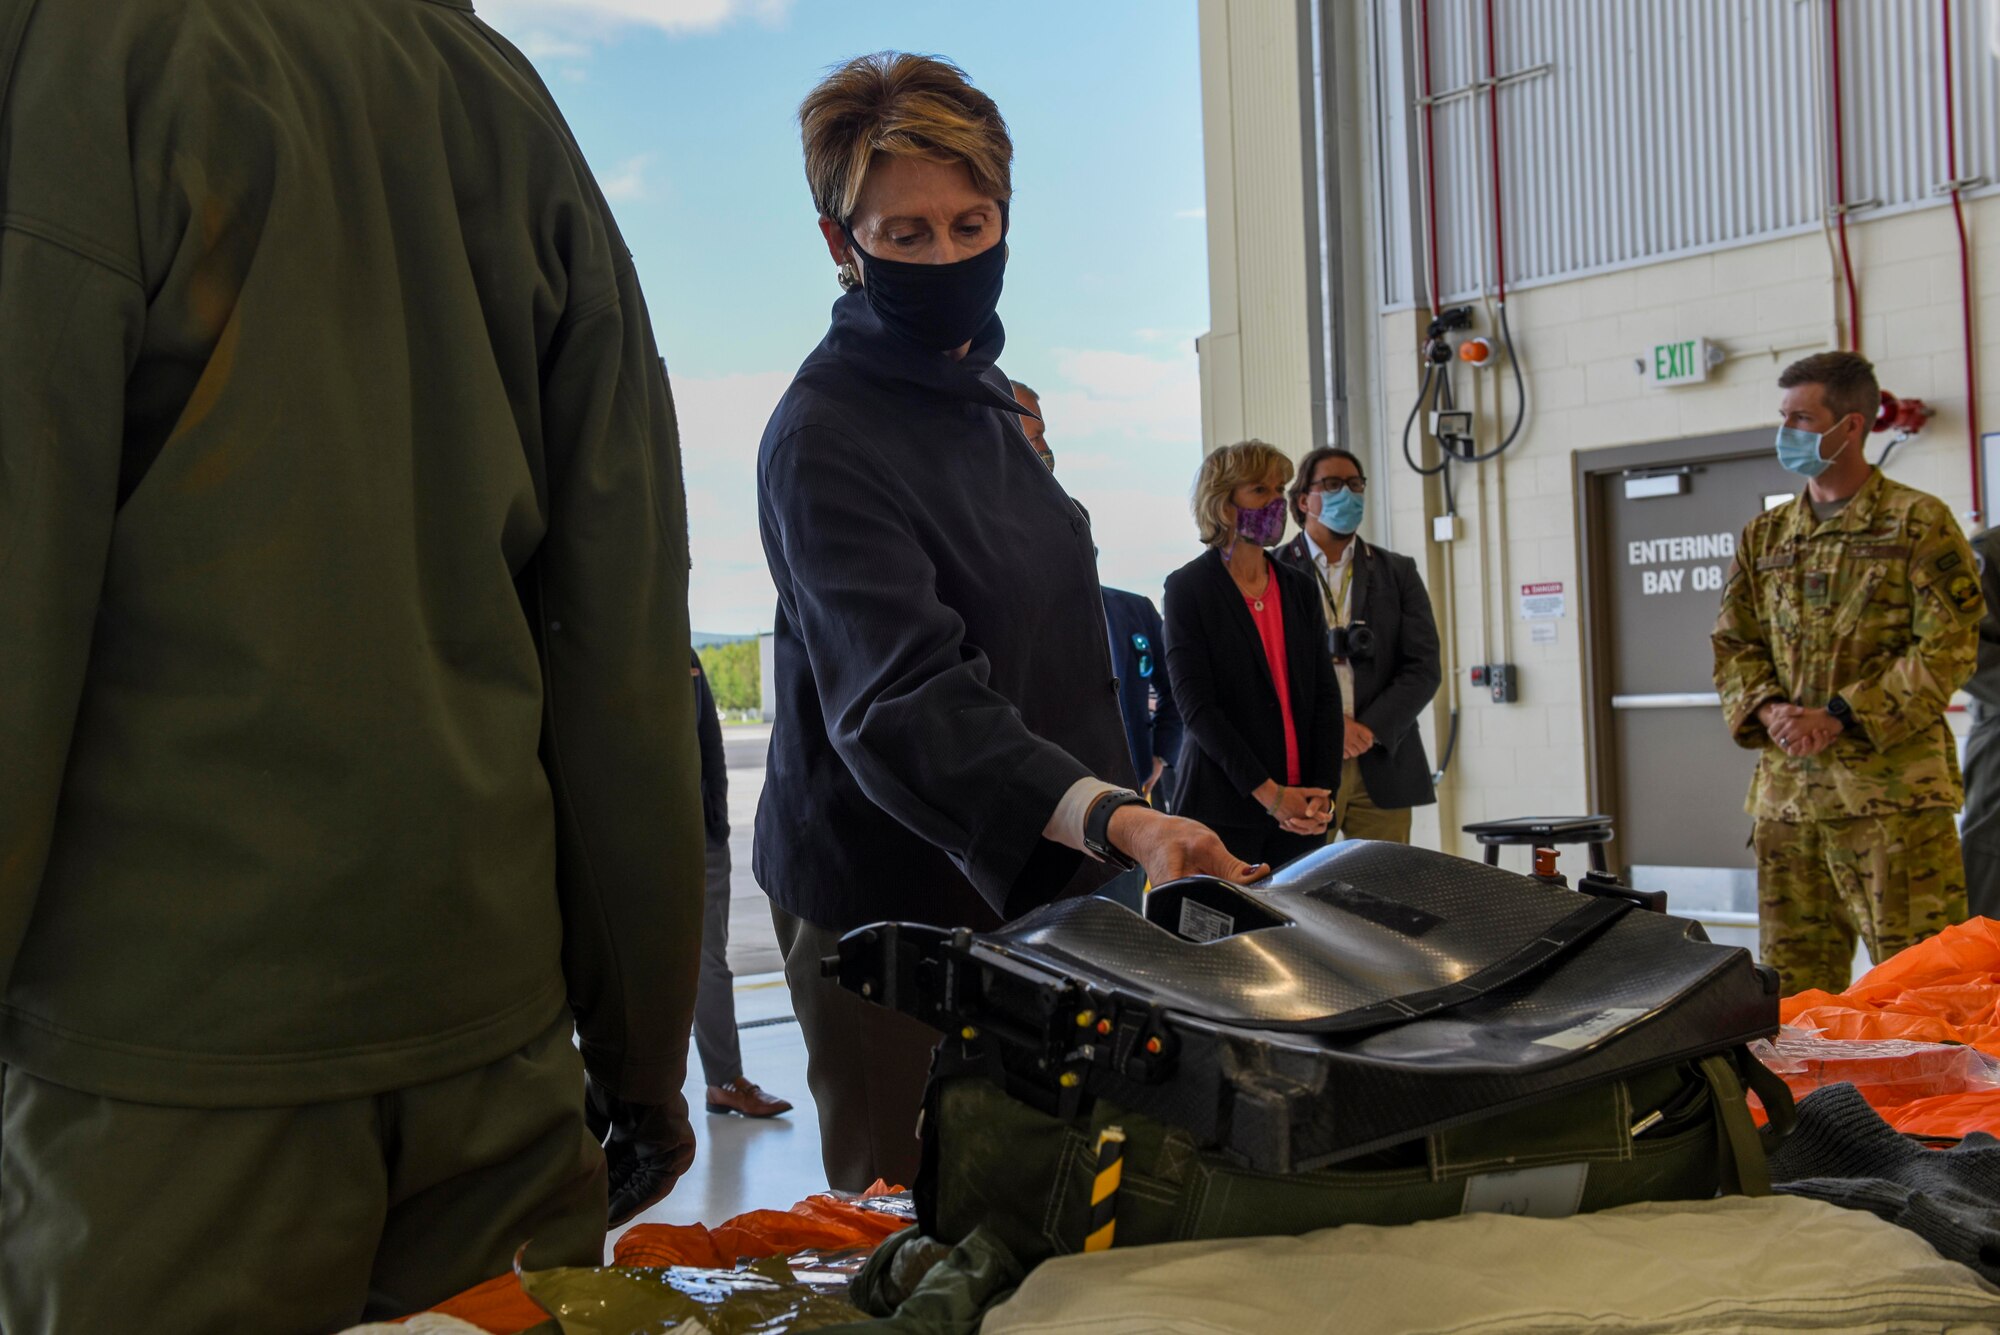 Secretary of the Air Force Barbara M. Barrett looks at the contents of an F-35A Lightning II Arctic seat kit during her visit to Eielson Air Force Base, Alaska, July 7, 2020. Barrett focused her visit on exploring arctic capabilities found only at the U.S. Air Force’s northern-most fighter wing. (U.S. Air Force photo by Airman 1st Class Aaron Larue Guerrisky)